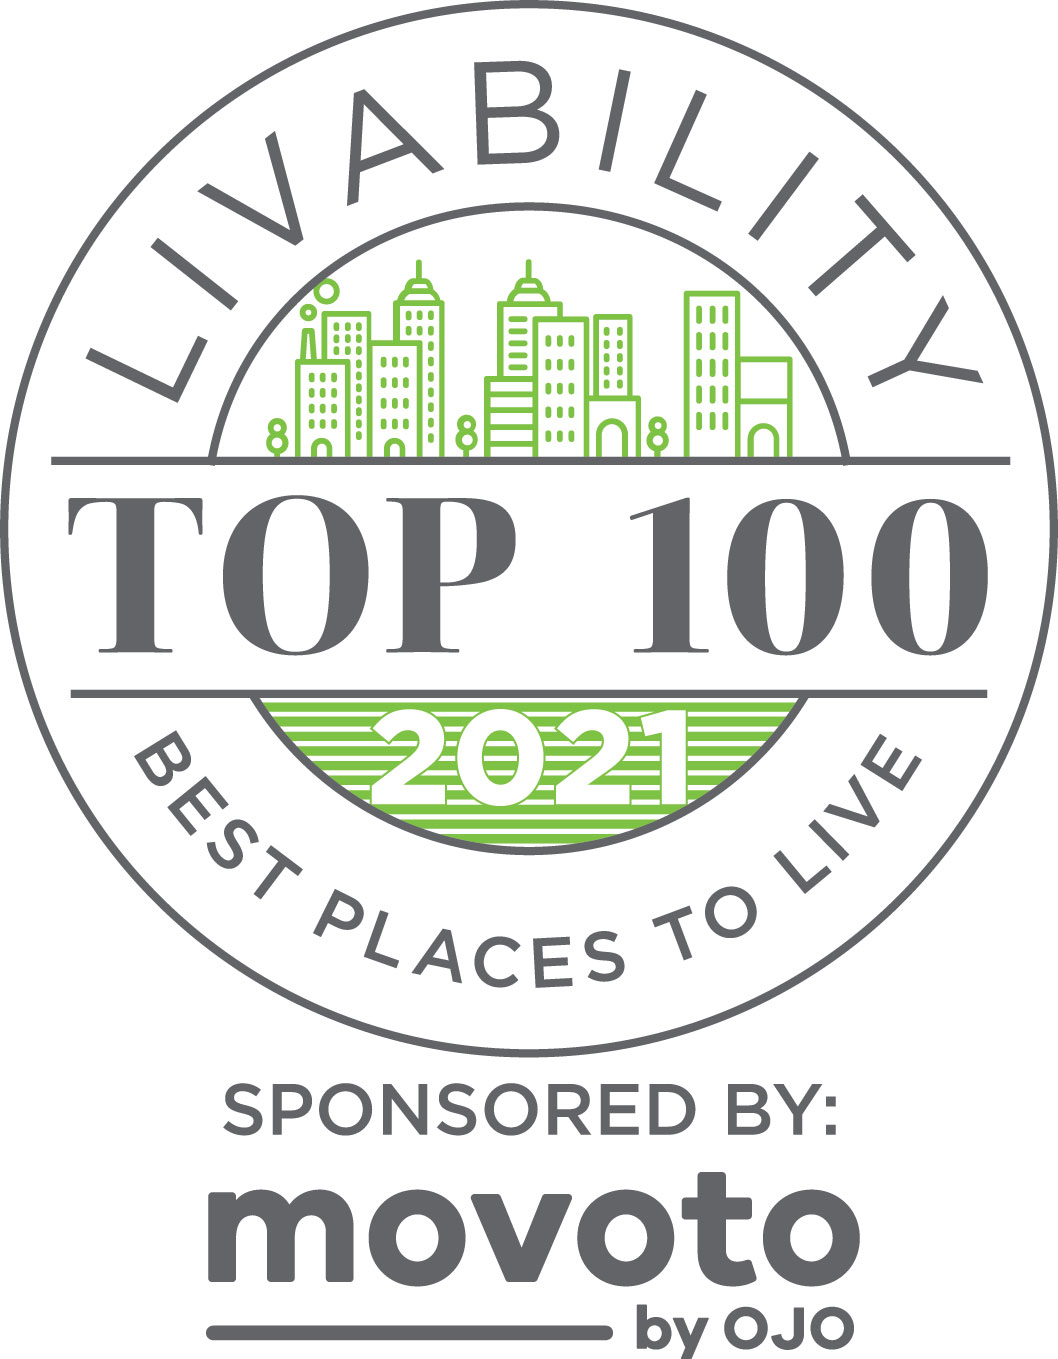 Newport has been named one of the 2021 Top 100 Best Places to Live